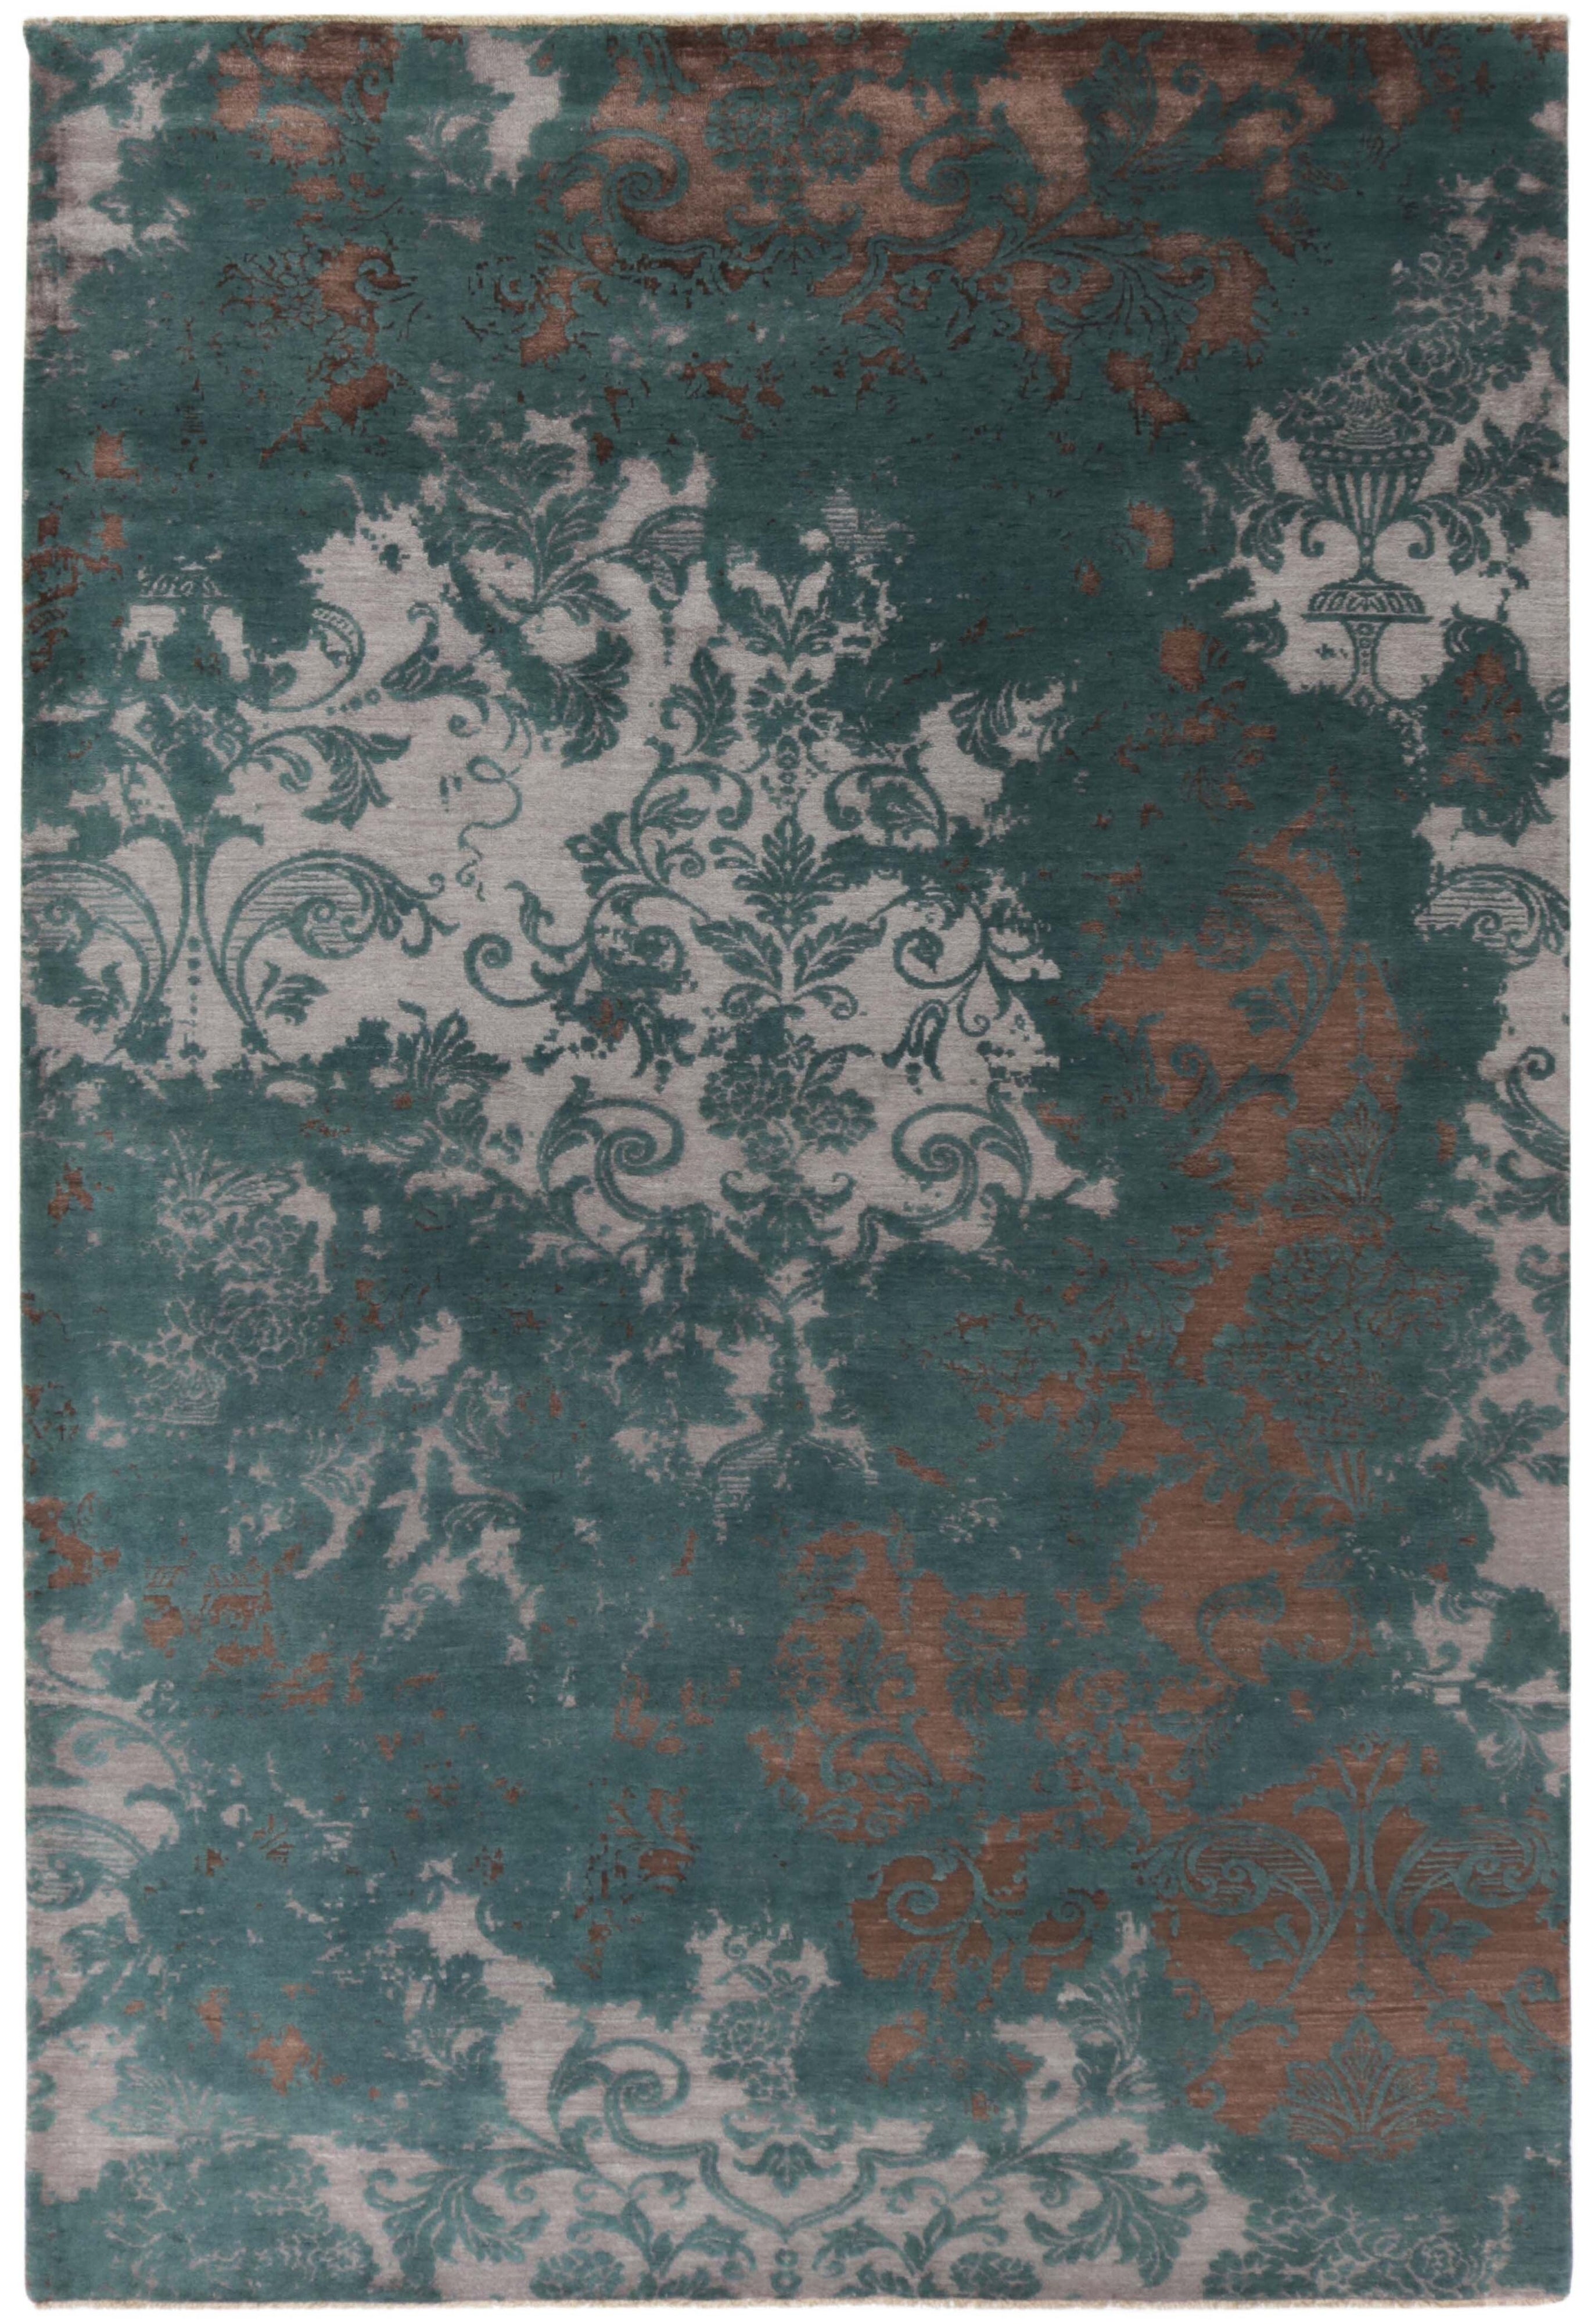 Authentic oriental rug with a damask pattern in green